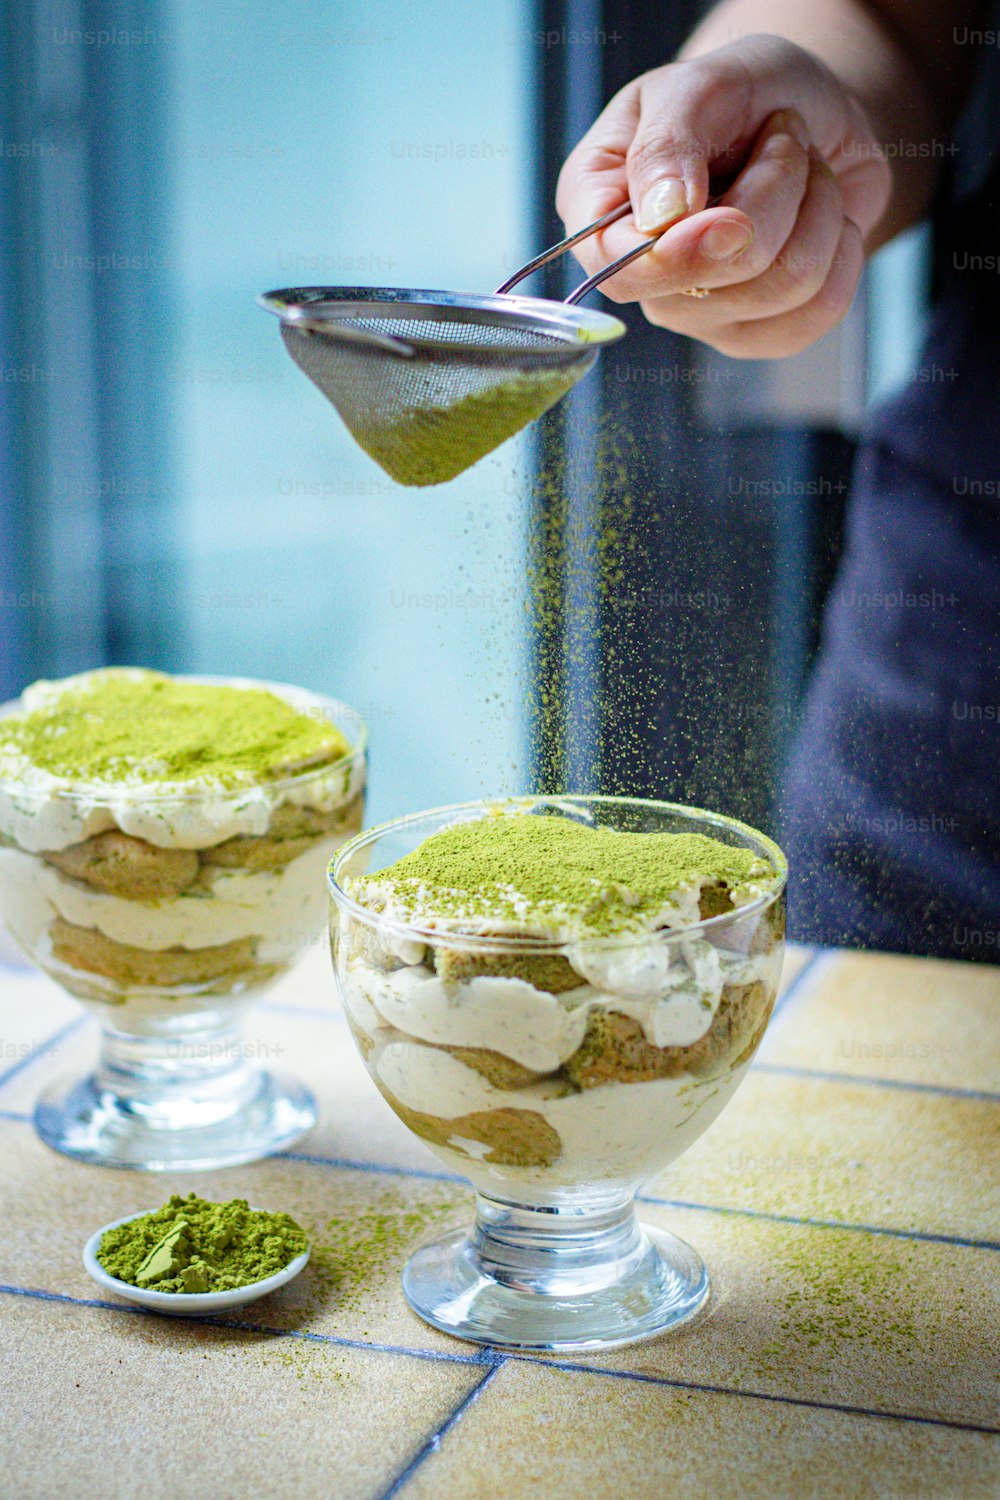 a person sprinkling green powder on top of a dessert